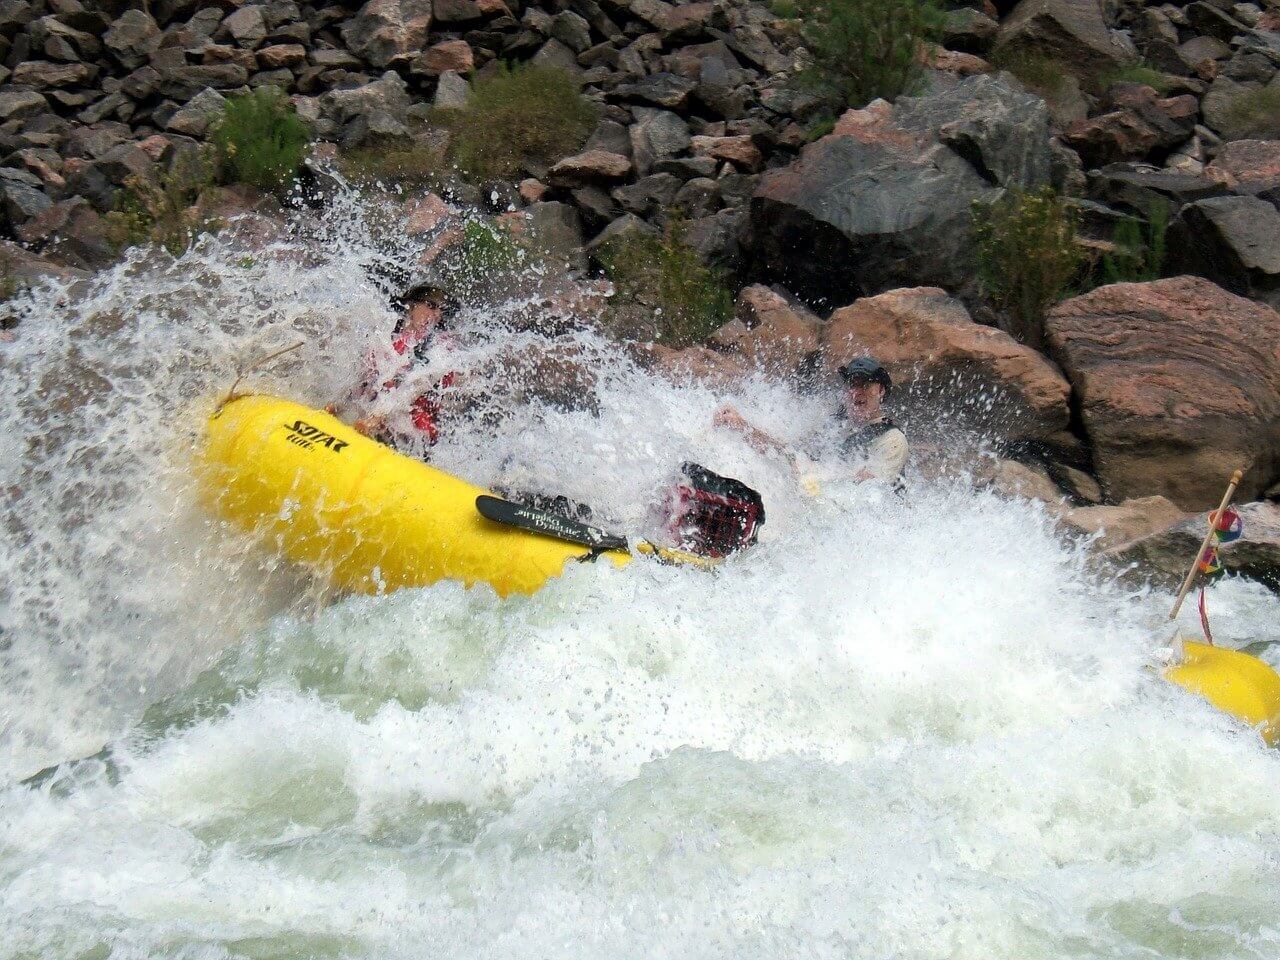 IS RAFTING THE GRAND CANYON DANGEROUS?